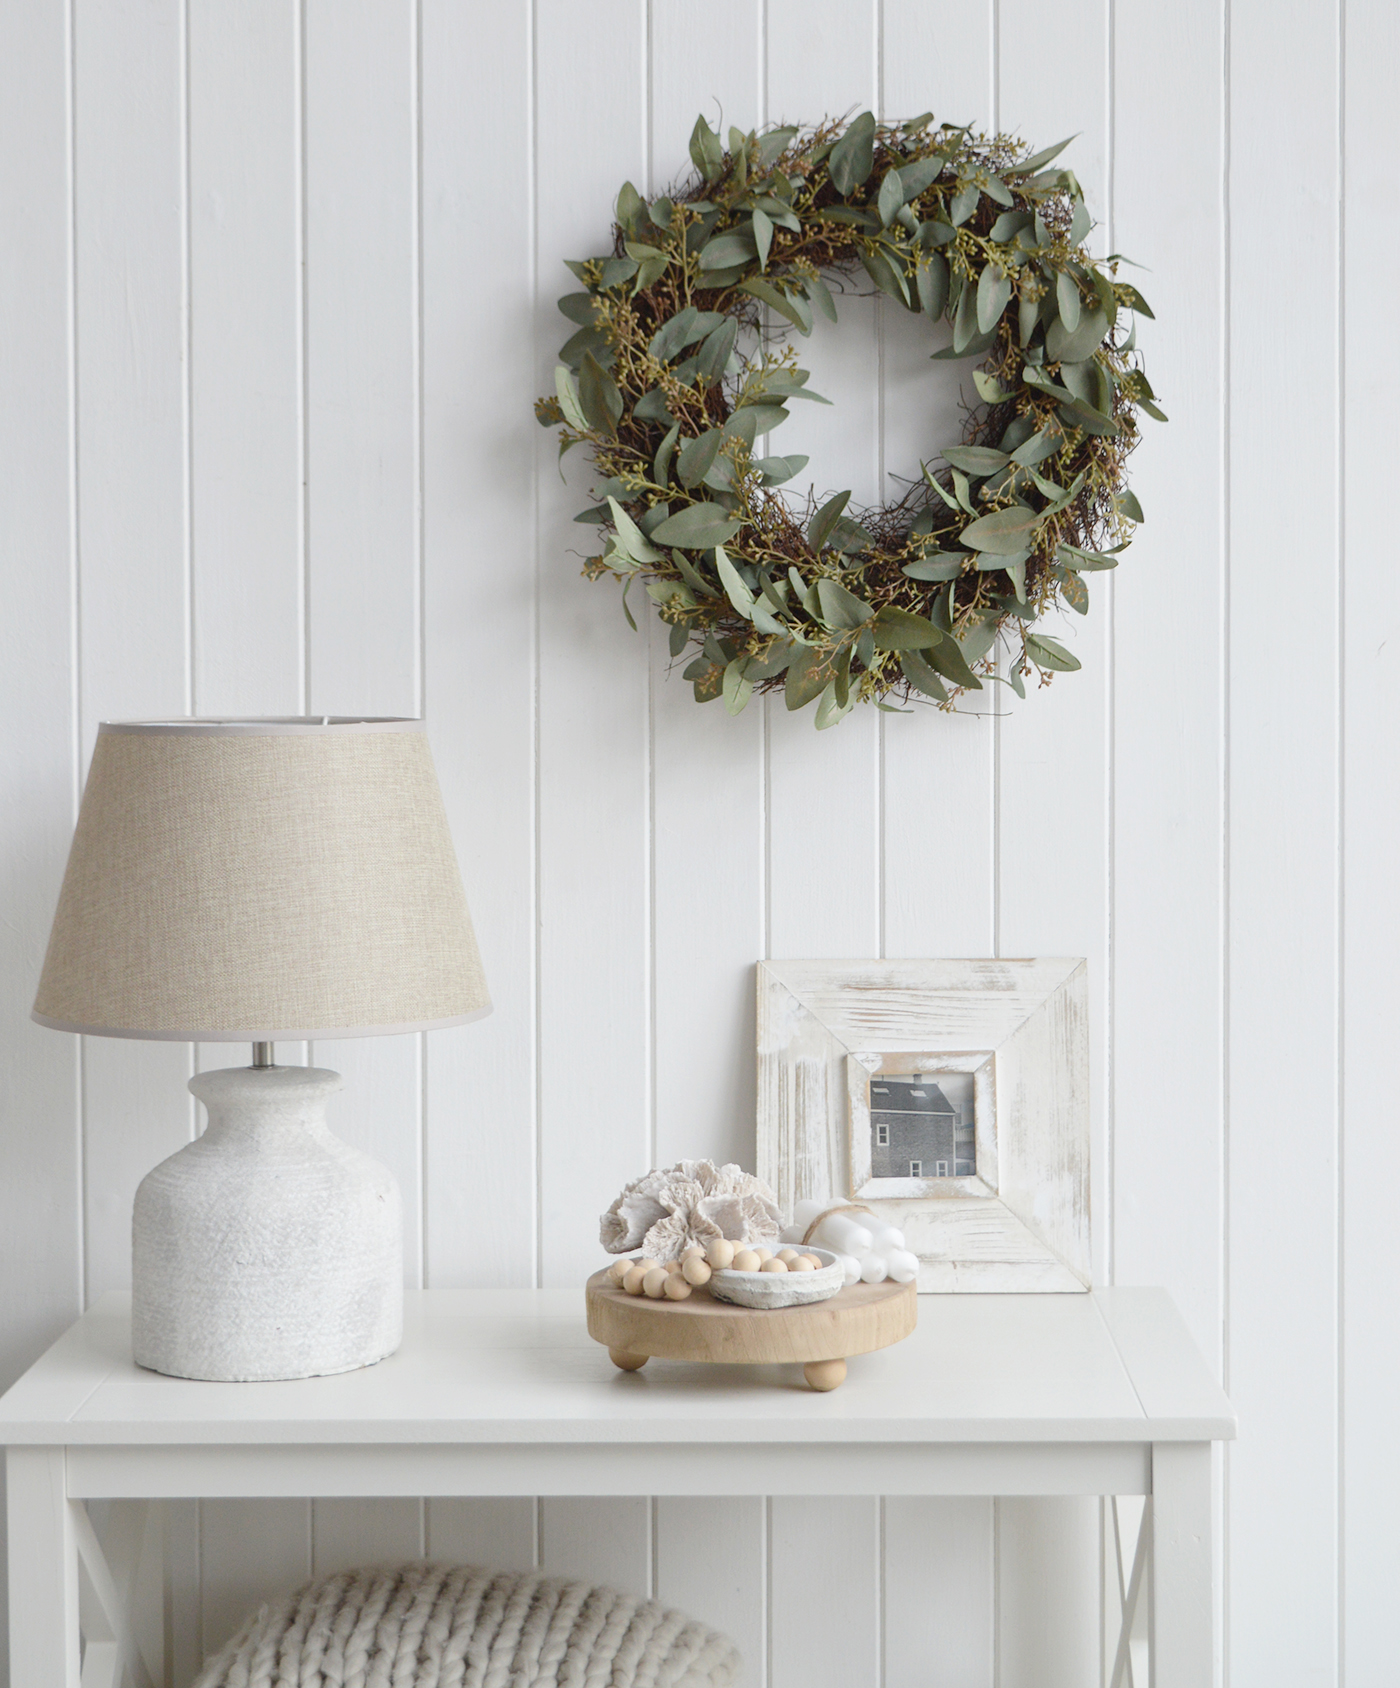 Timeless New England style with our beautiful faux Eucalyptus wreath to decorate coastal and Hamptons homes and interiors